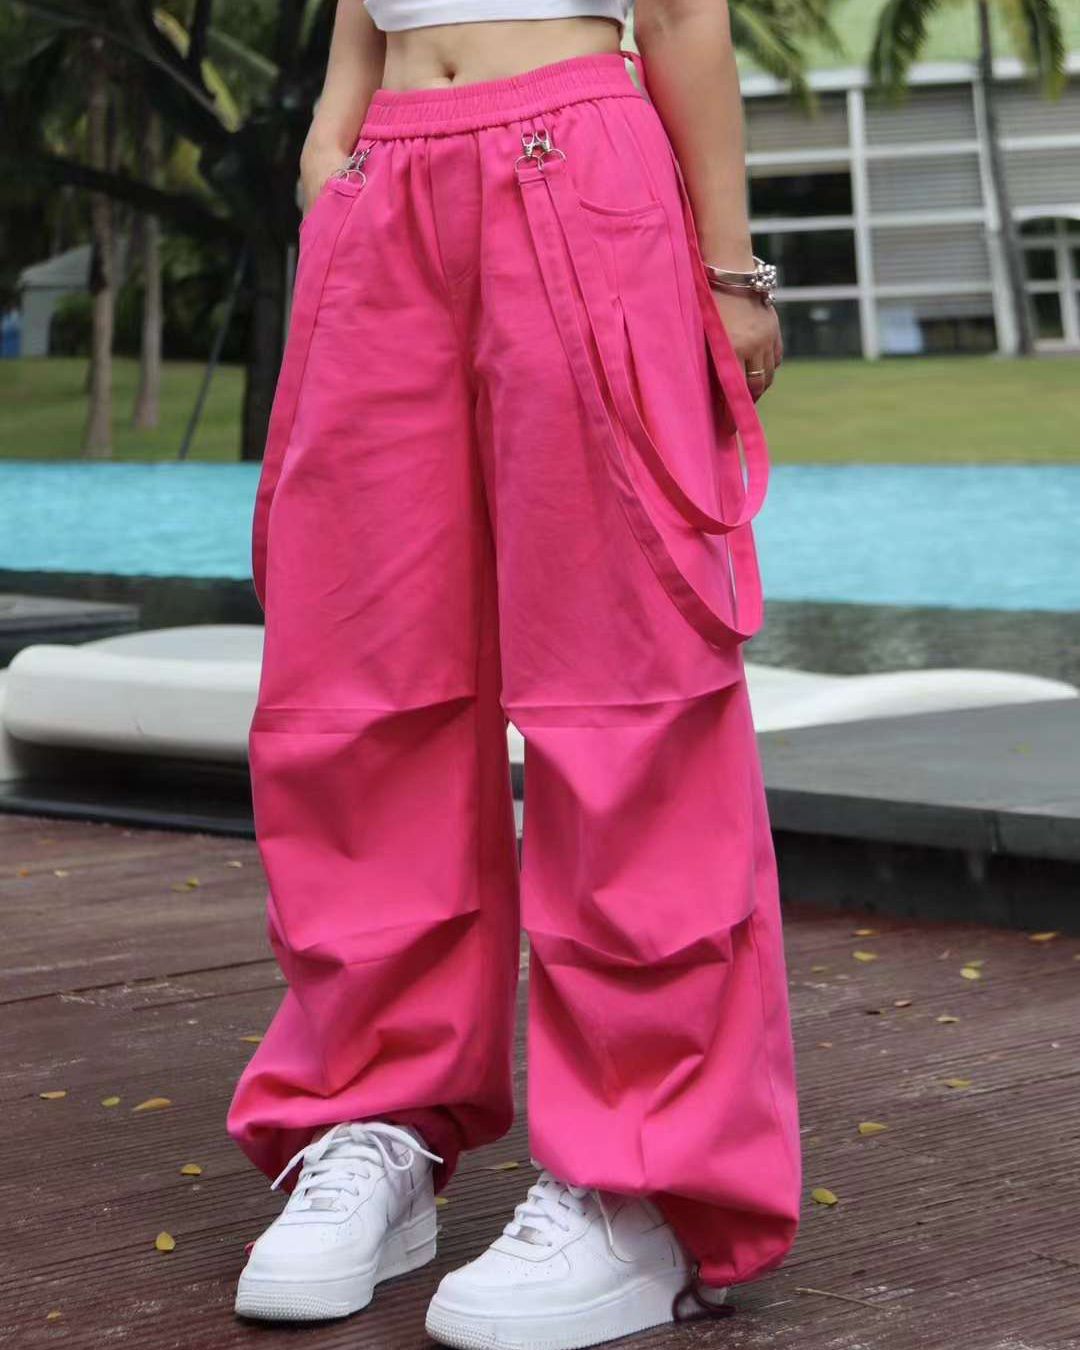 PARACHUTE PANTS,baggy fit, bottomwear, casual, cotton, drawstring, full length, high rise, parachutes, pink, straps, streetwear, summer, woven,parachute_pants_pink,Color- PinkFabric- CottonFit- Baggy Fit Length- Full LengthWaist- High RiseHem- DrawstringClosure- Elasticated WaistNo. of Pockets- 4Print- SolidSize- Waist- 26-28 in; Length- 41in